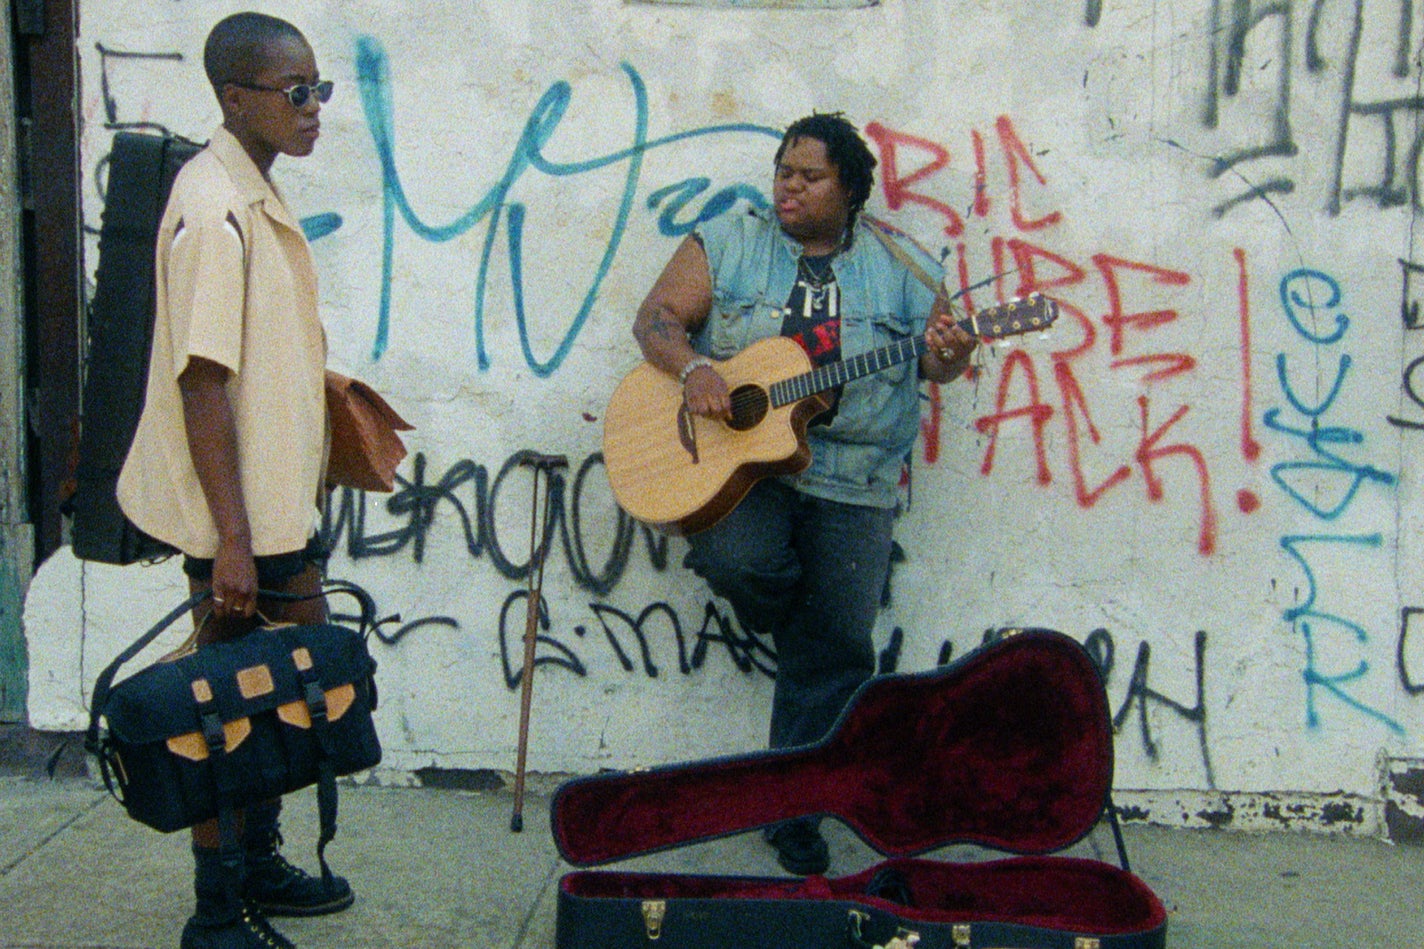 Two Black women standing on the street, one of them playing an acoustic guitar.